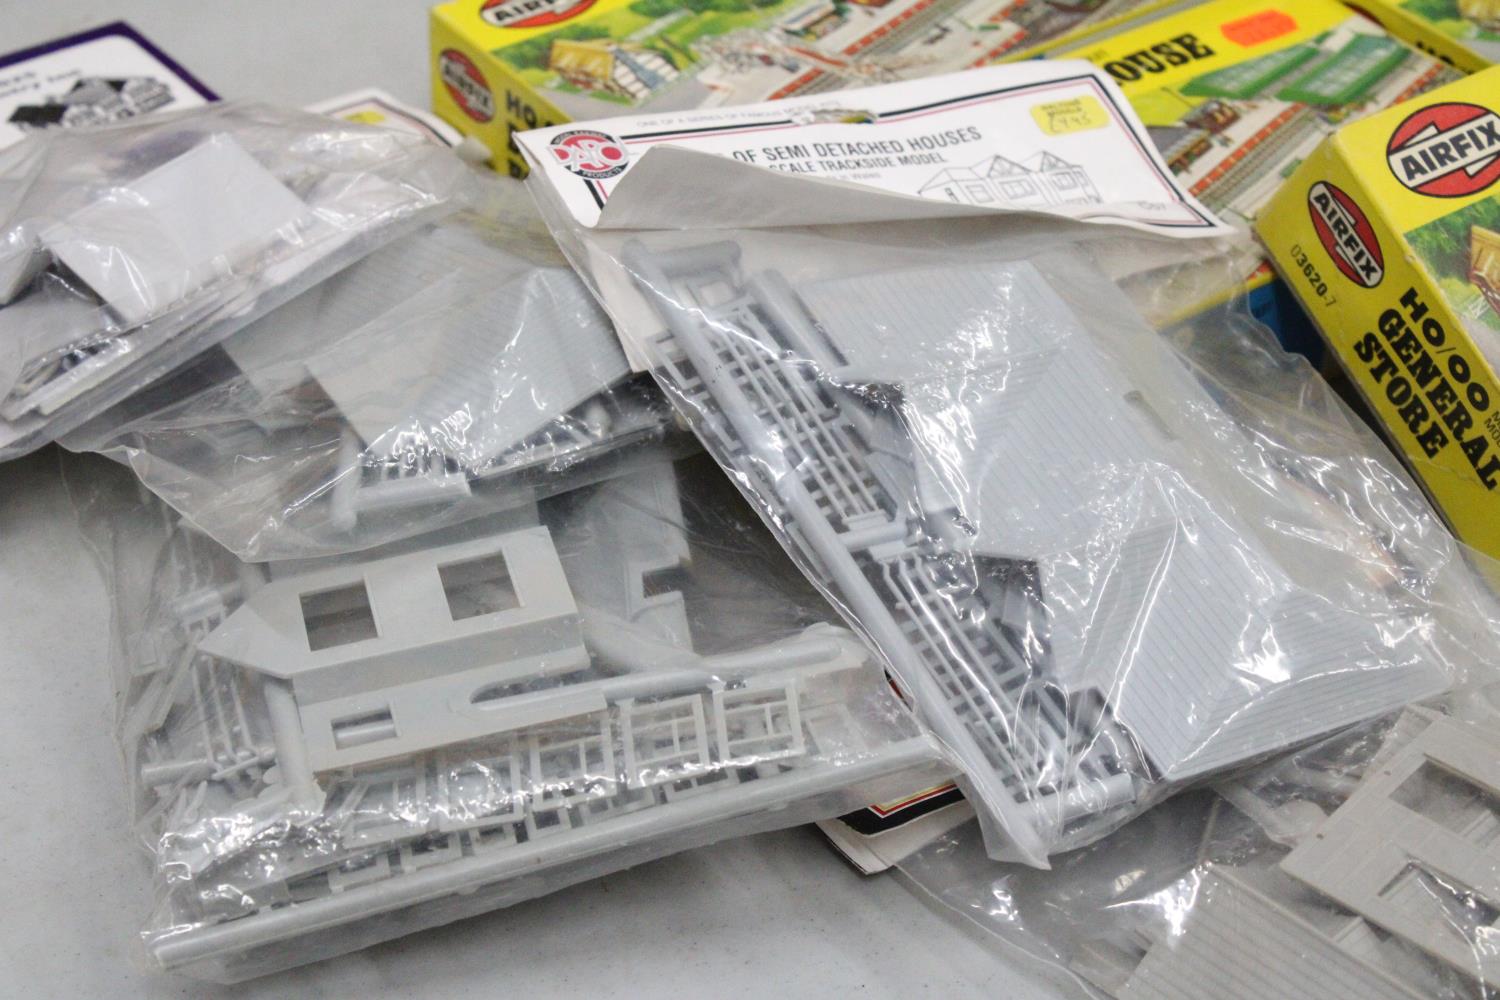 FIVE BOXED AIRFIX 00 GAUGE BUILDING KITS TOGETHER WITH FIVE DAPOL HOUSE BUILDING KITS - Image 6 of 6